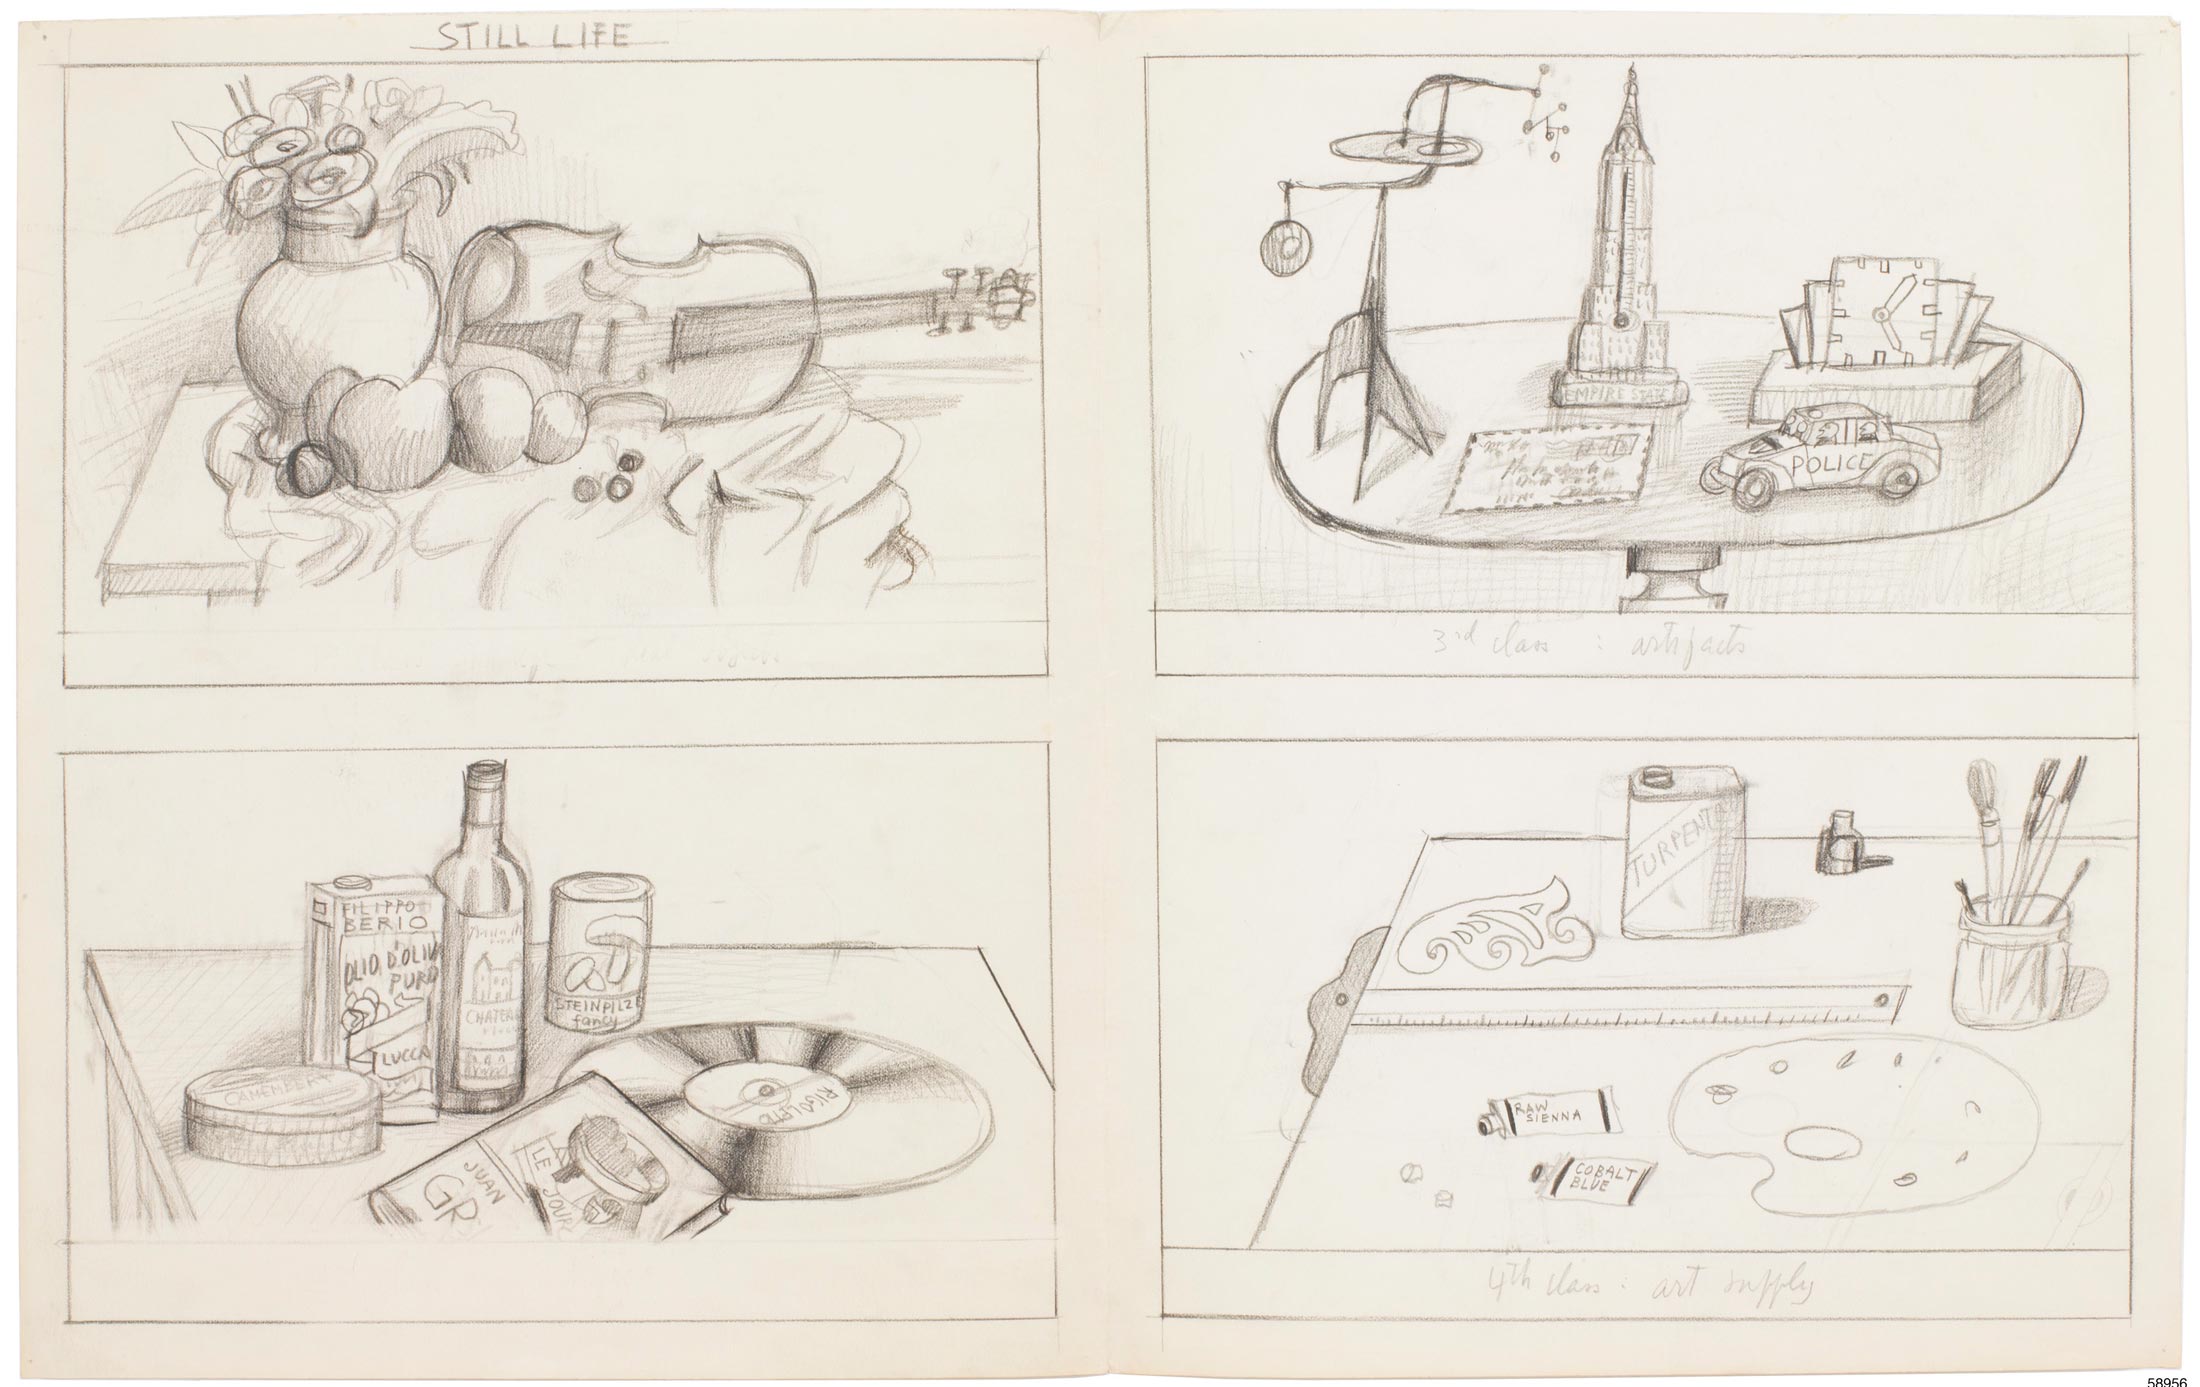 Study for the portfolio “Still-Lifes,” The New Yorker, June 8, 1981. Pencil on paper, 14 ½ x 23 in. Private collection.